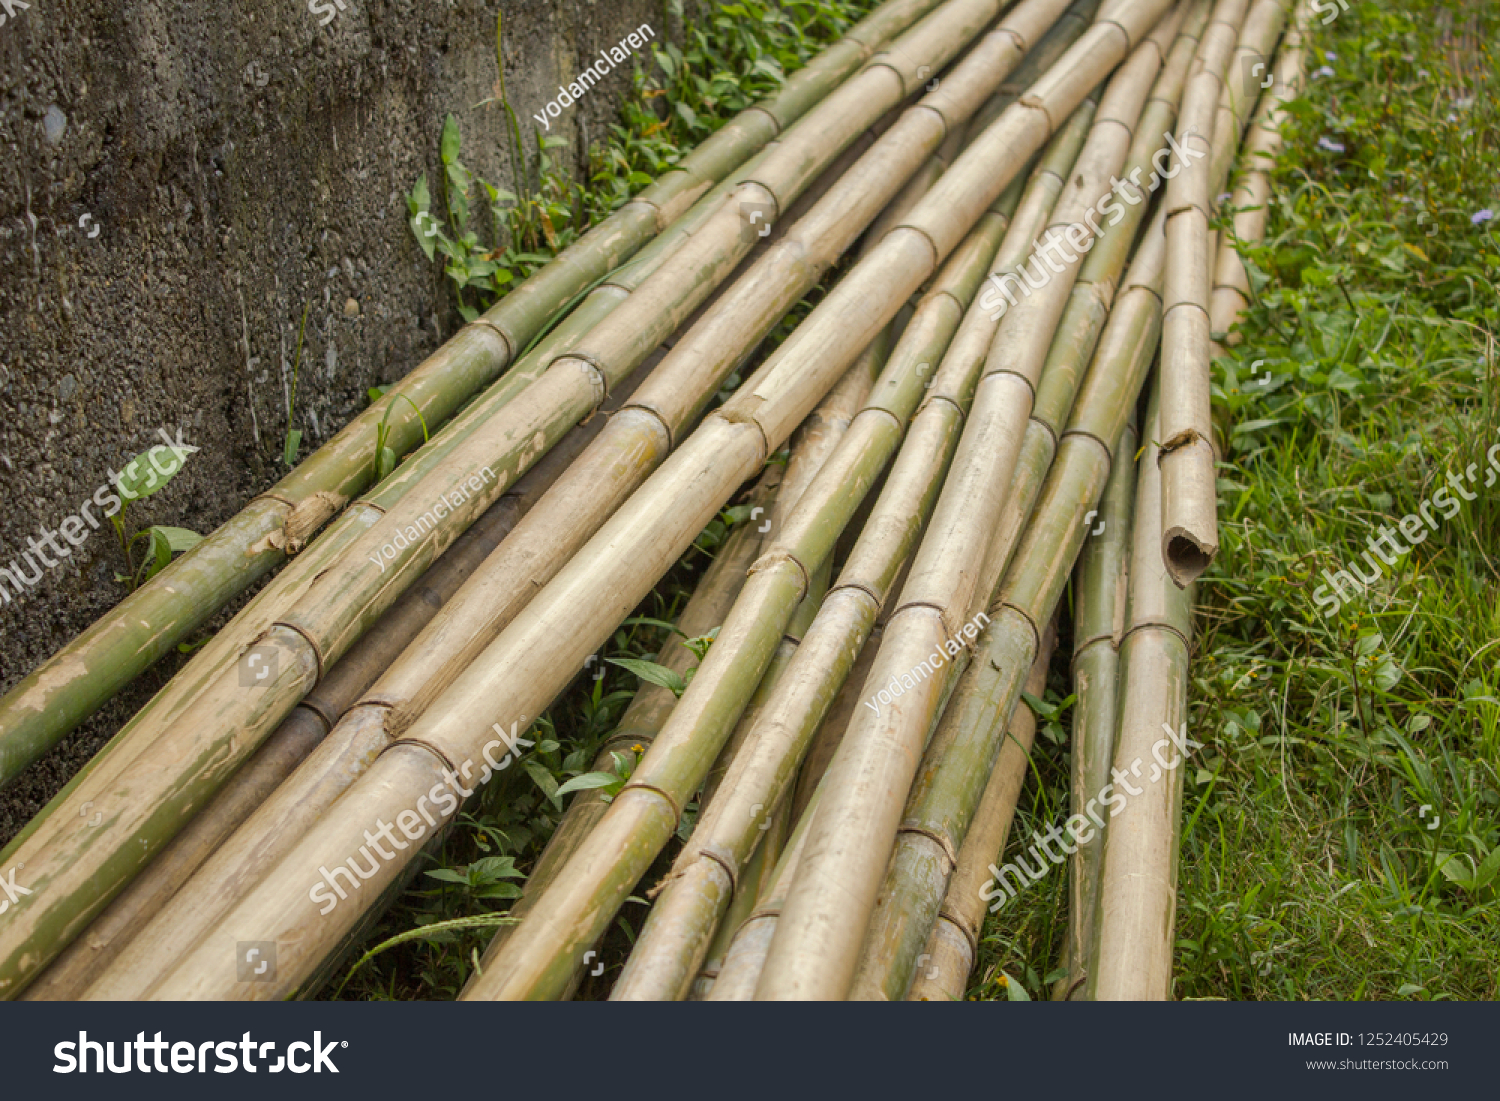 long trunks of dry gray green bamboo stalks lie on the grass near the concrete wall #1252405429